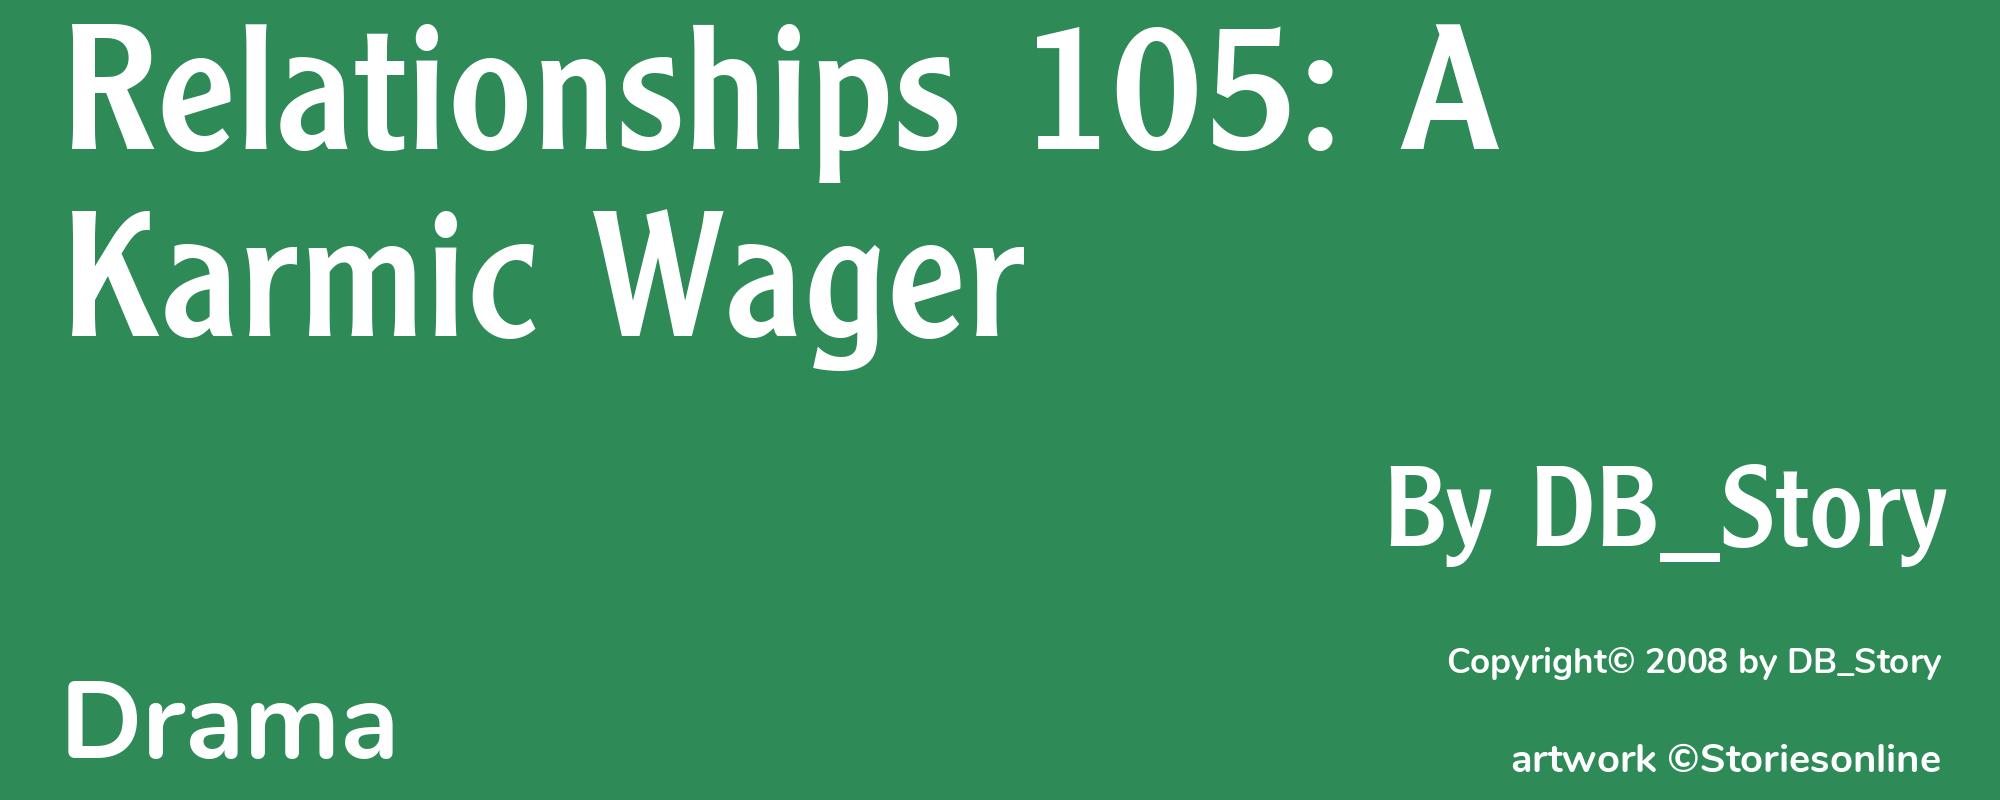 Relationships 105: A Karmic Wager - Cover